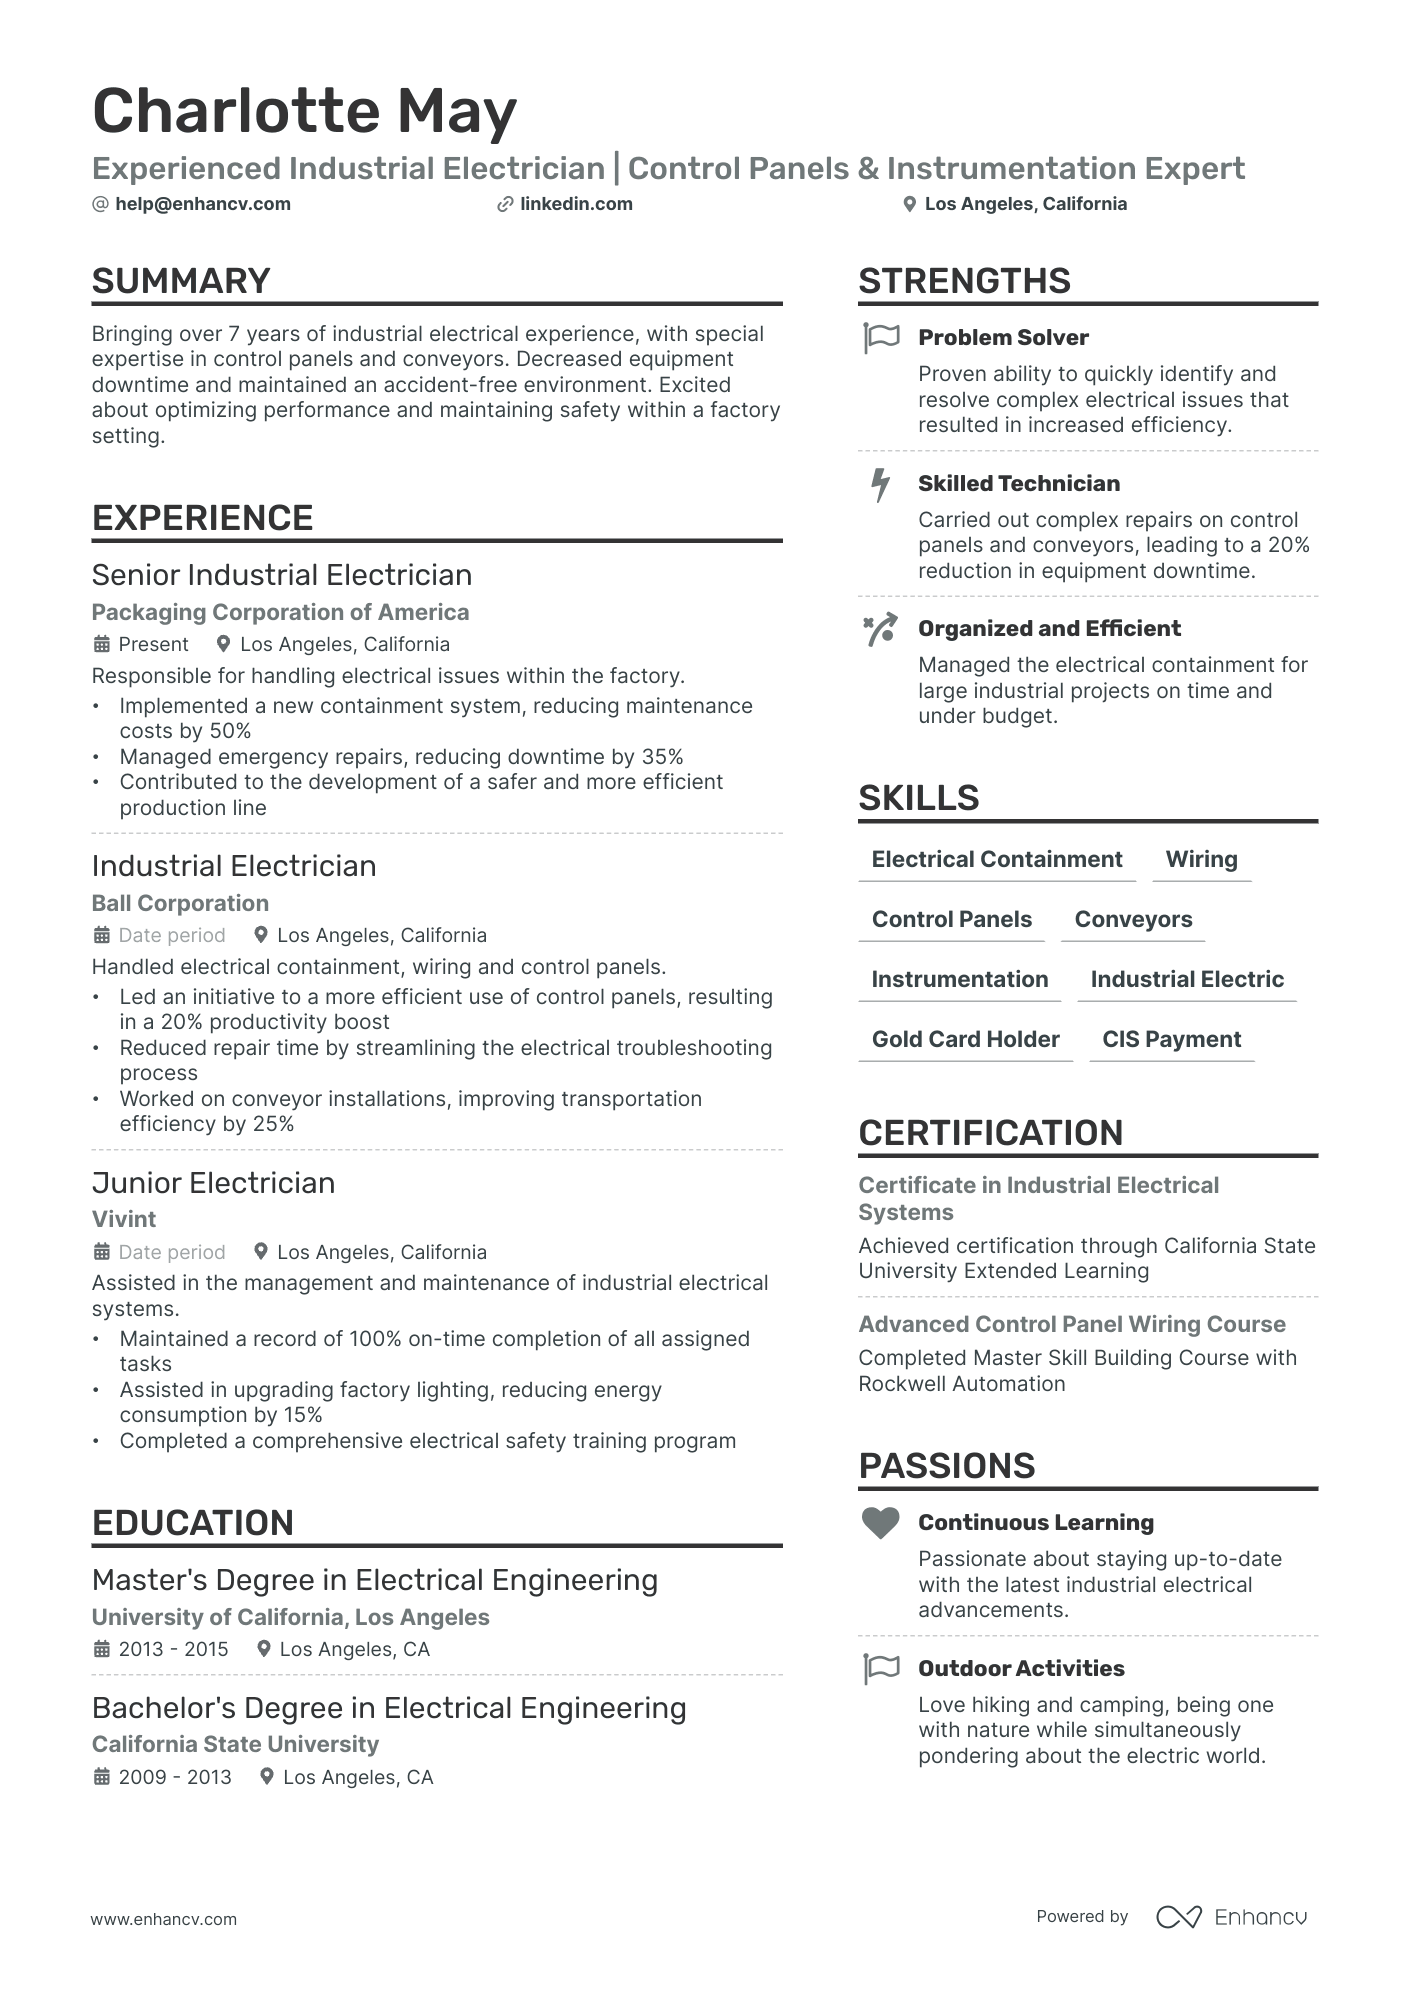 Industrial Electrician resume example